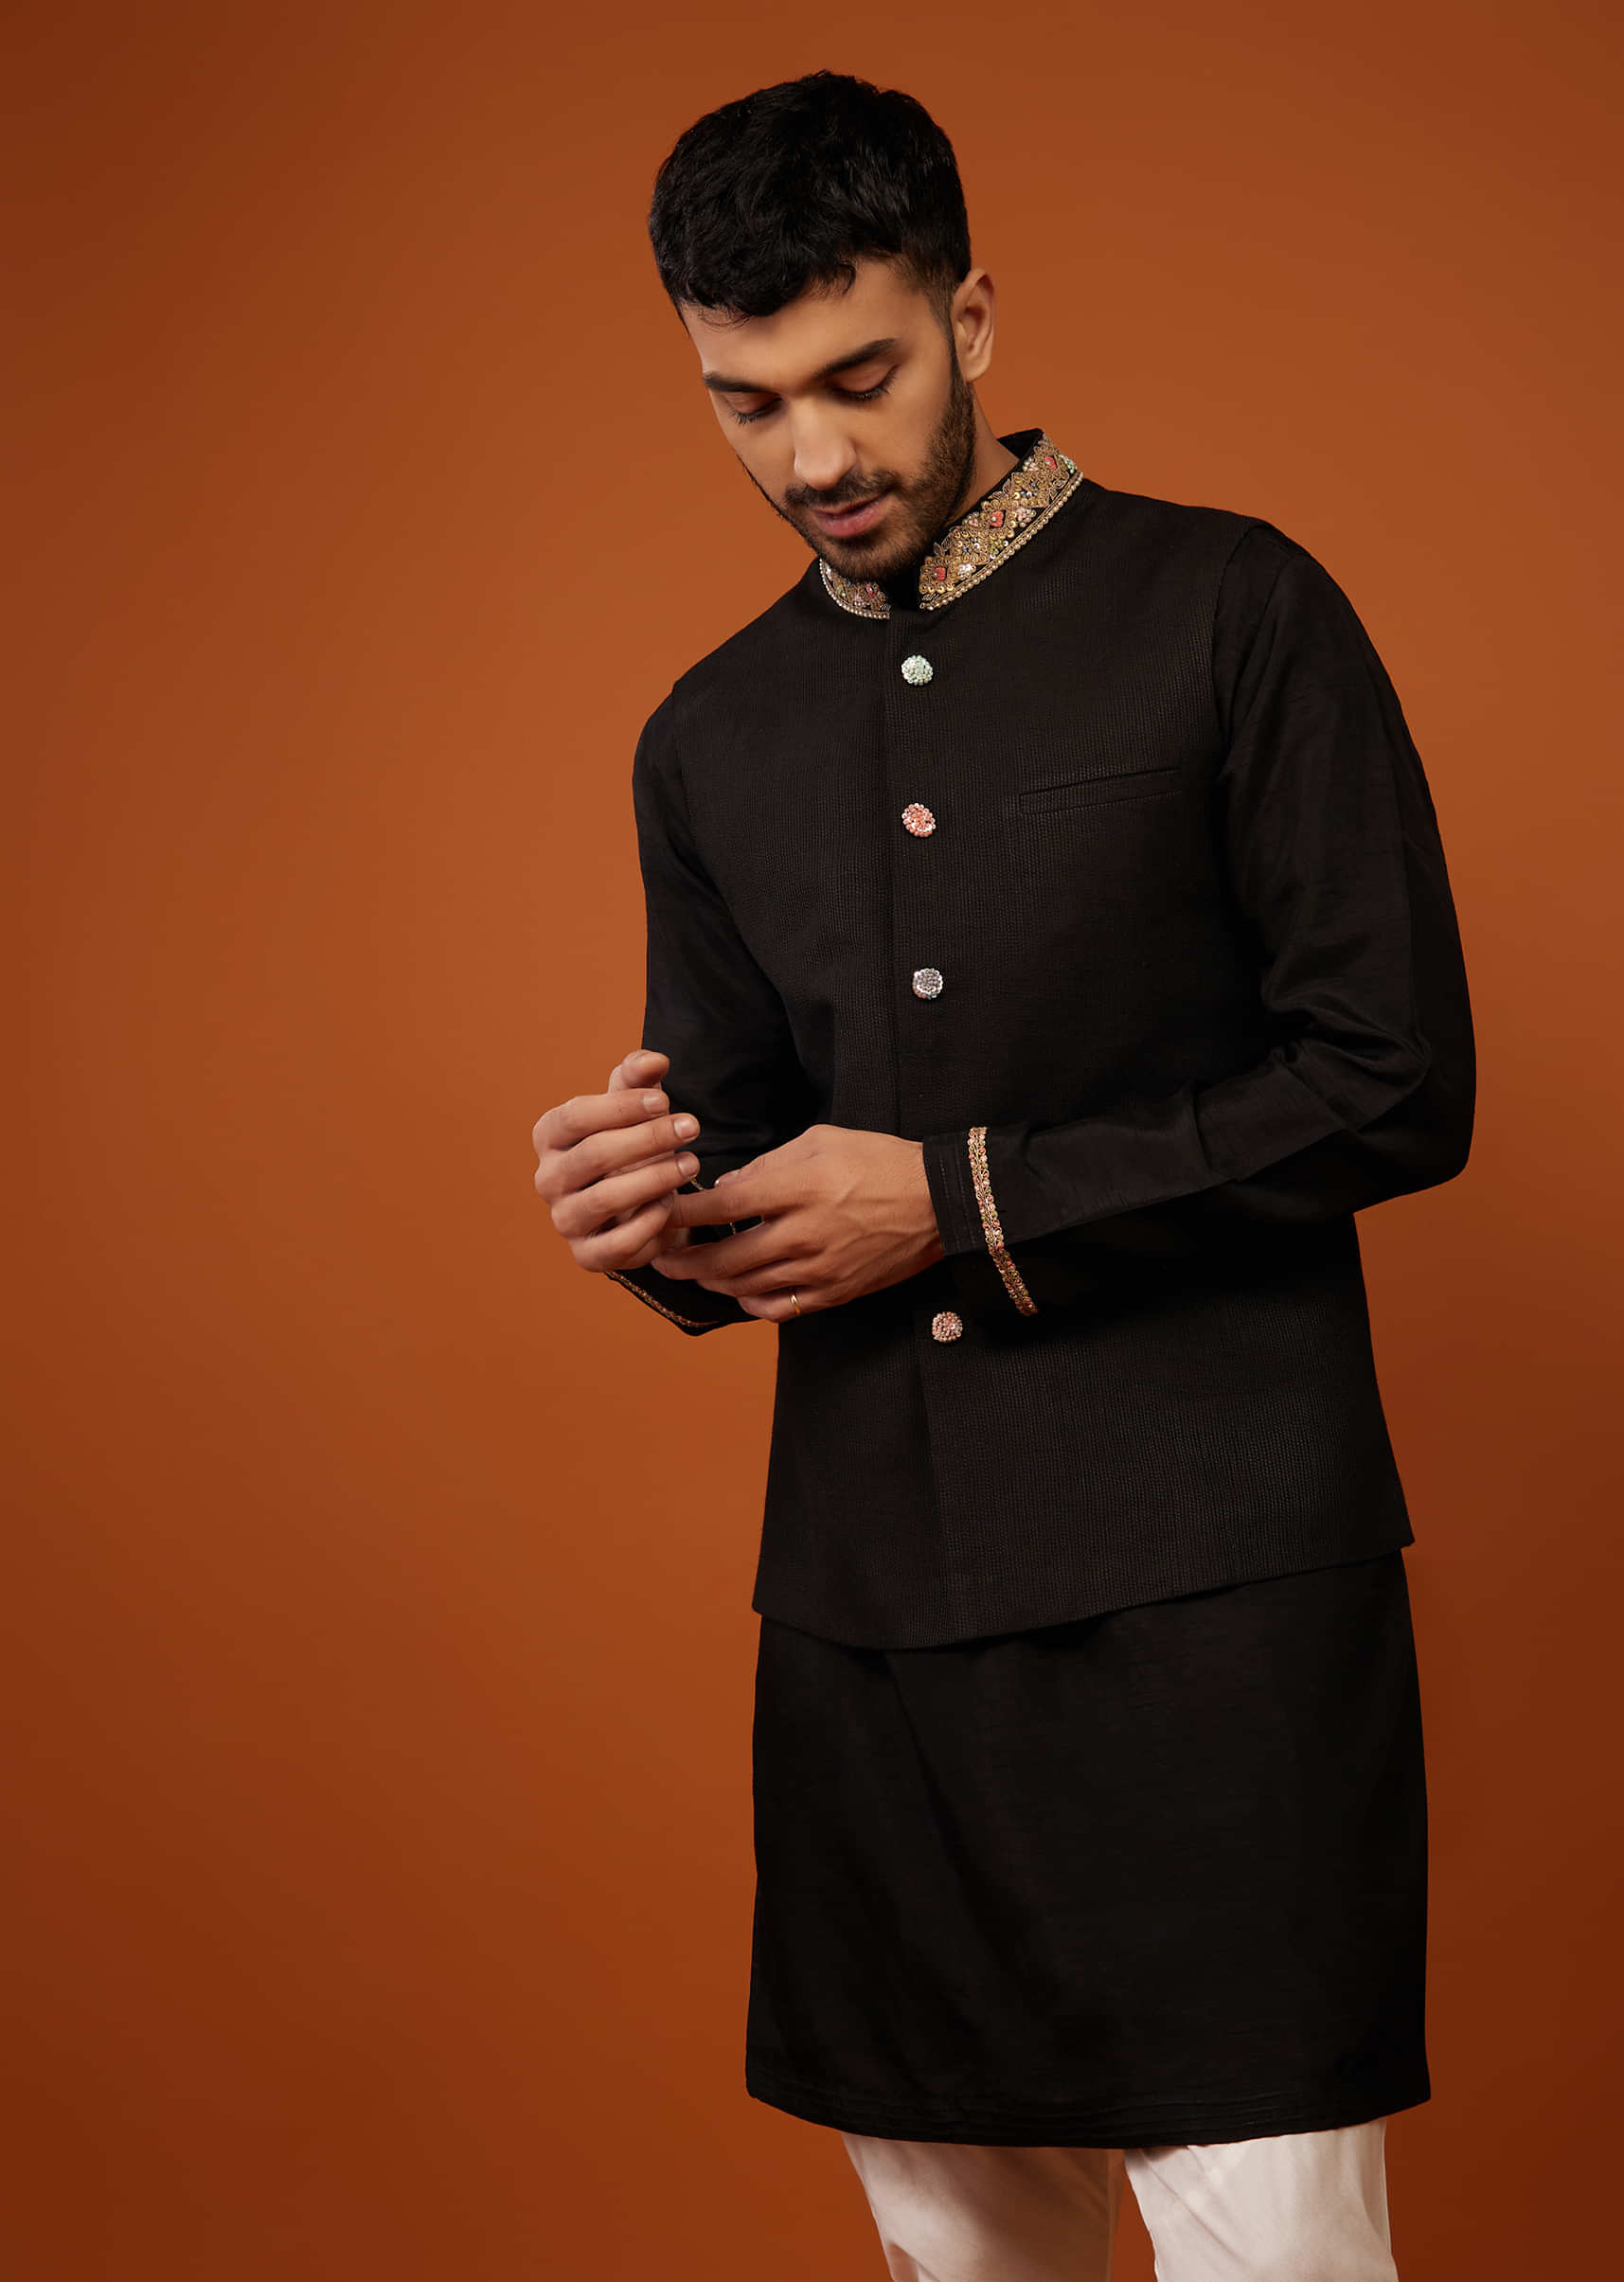 Silk Black Bandi Jacket Set With Embroidered Collar And Buttons